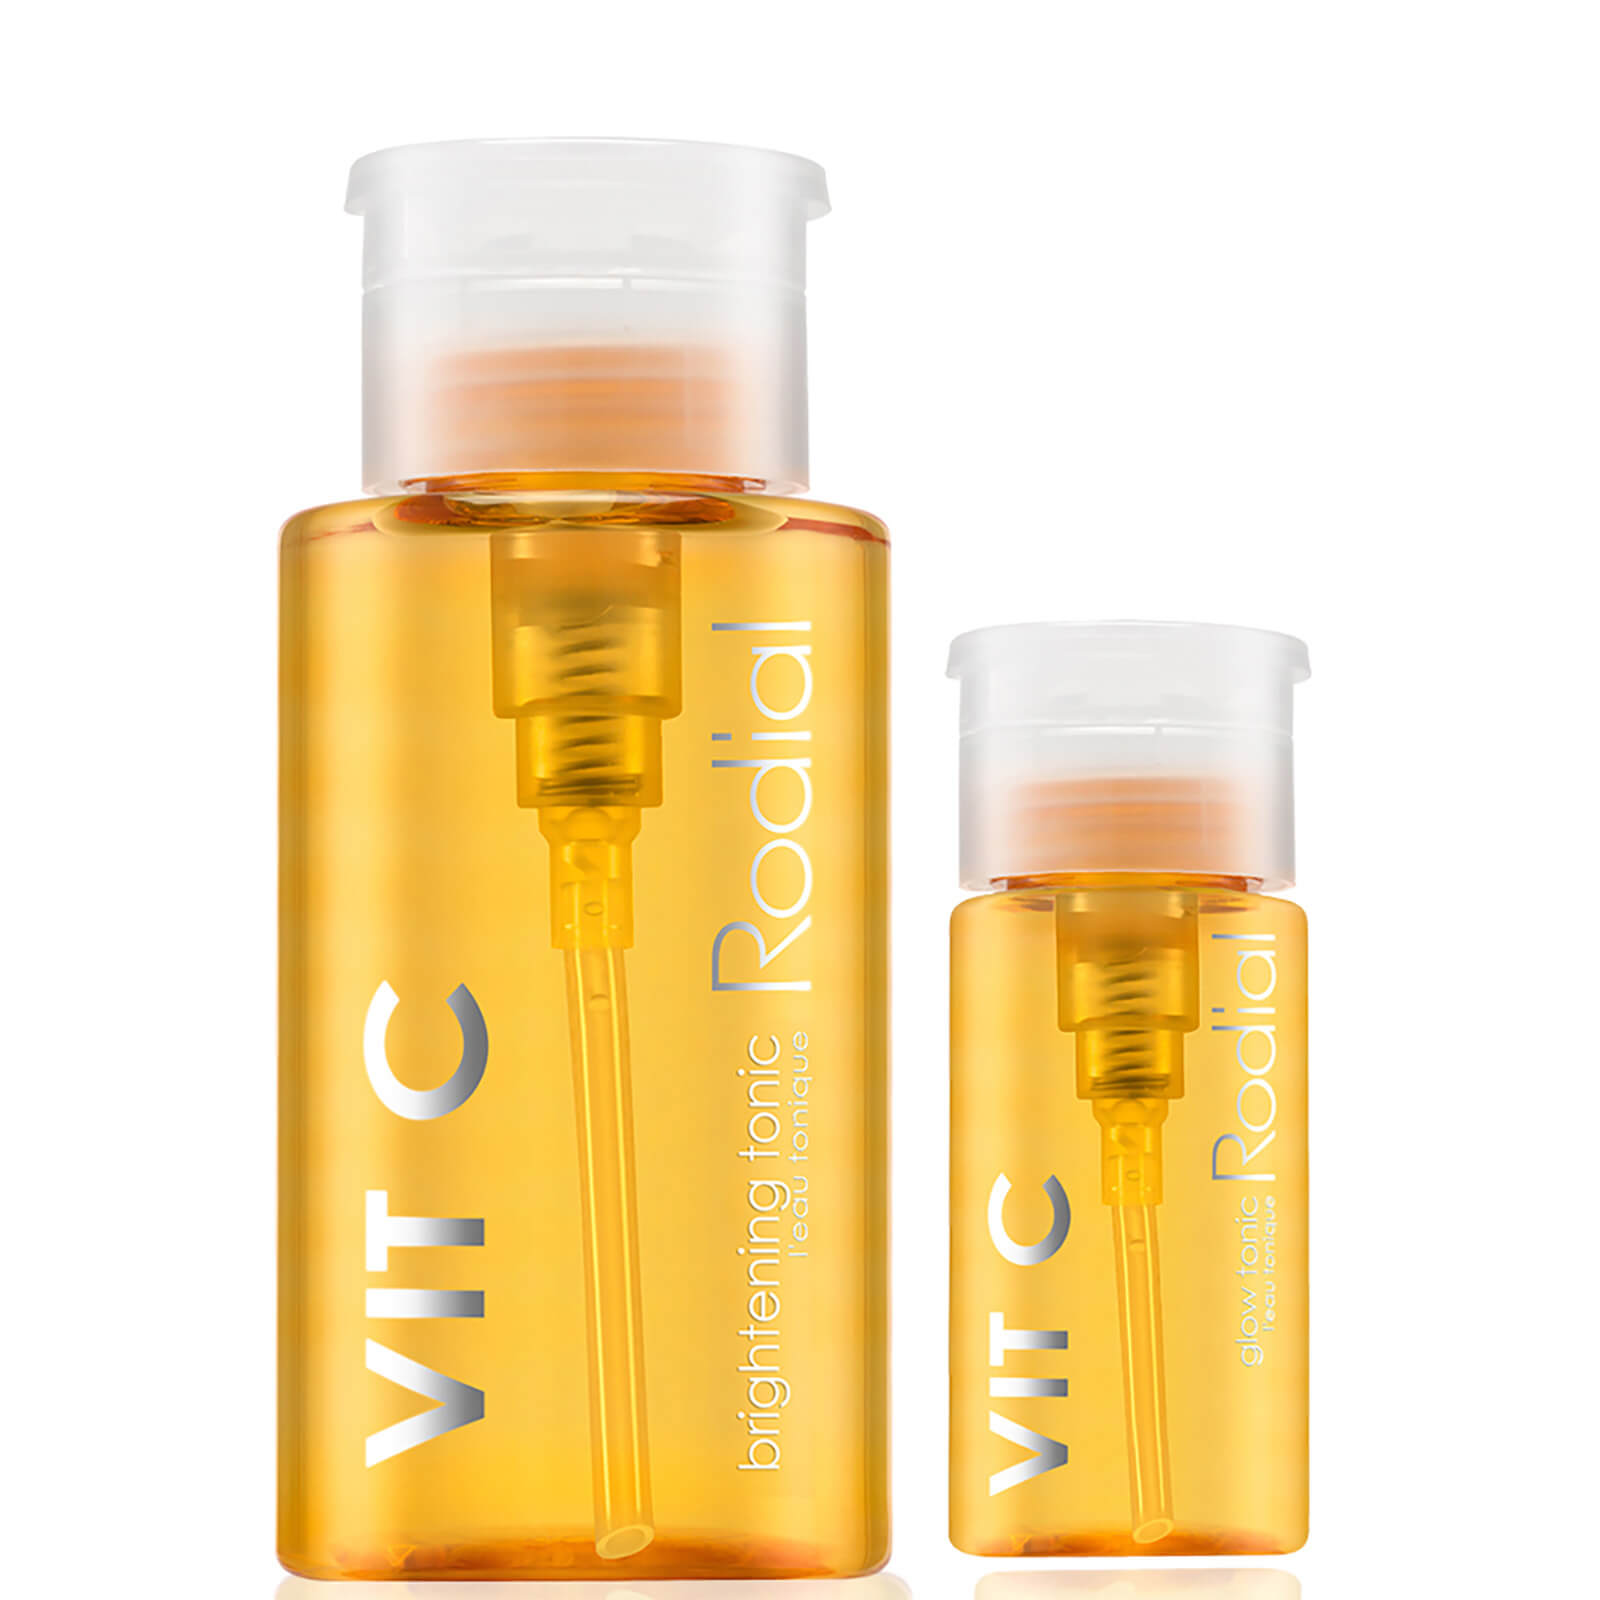 Rodial Vit C Home and Away Set (Worth £62.00)